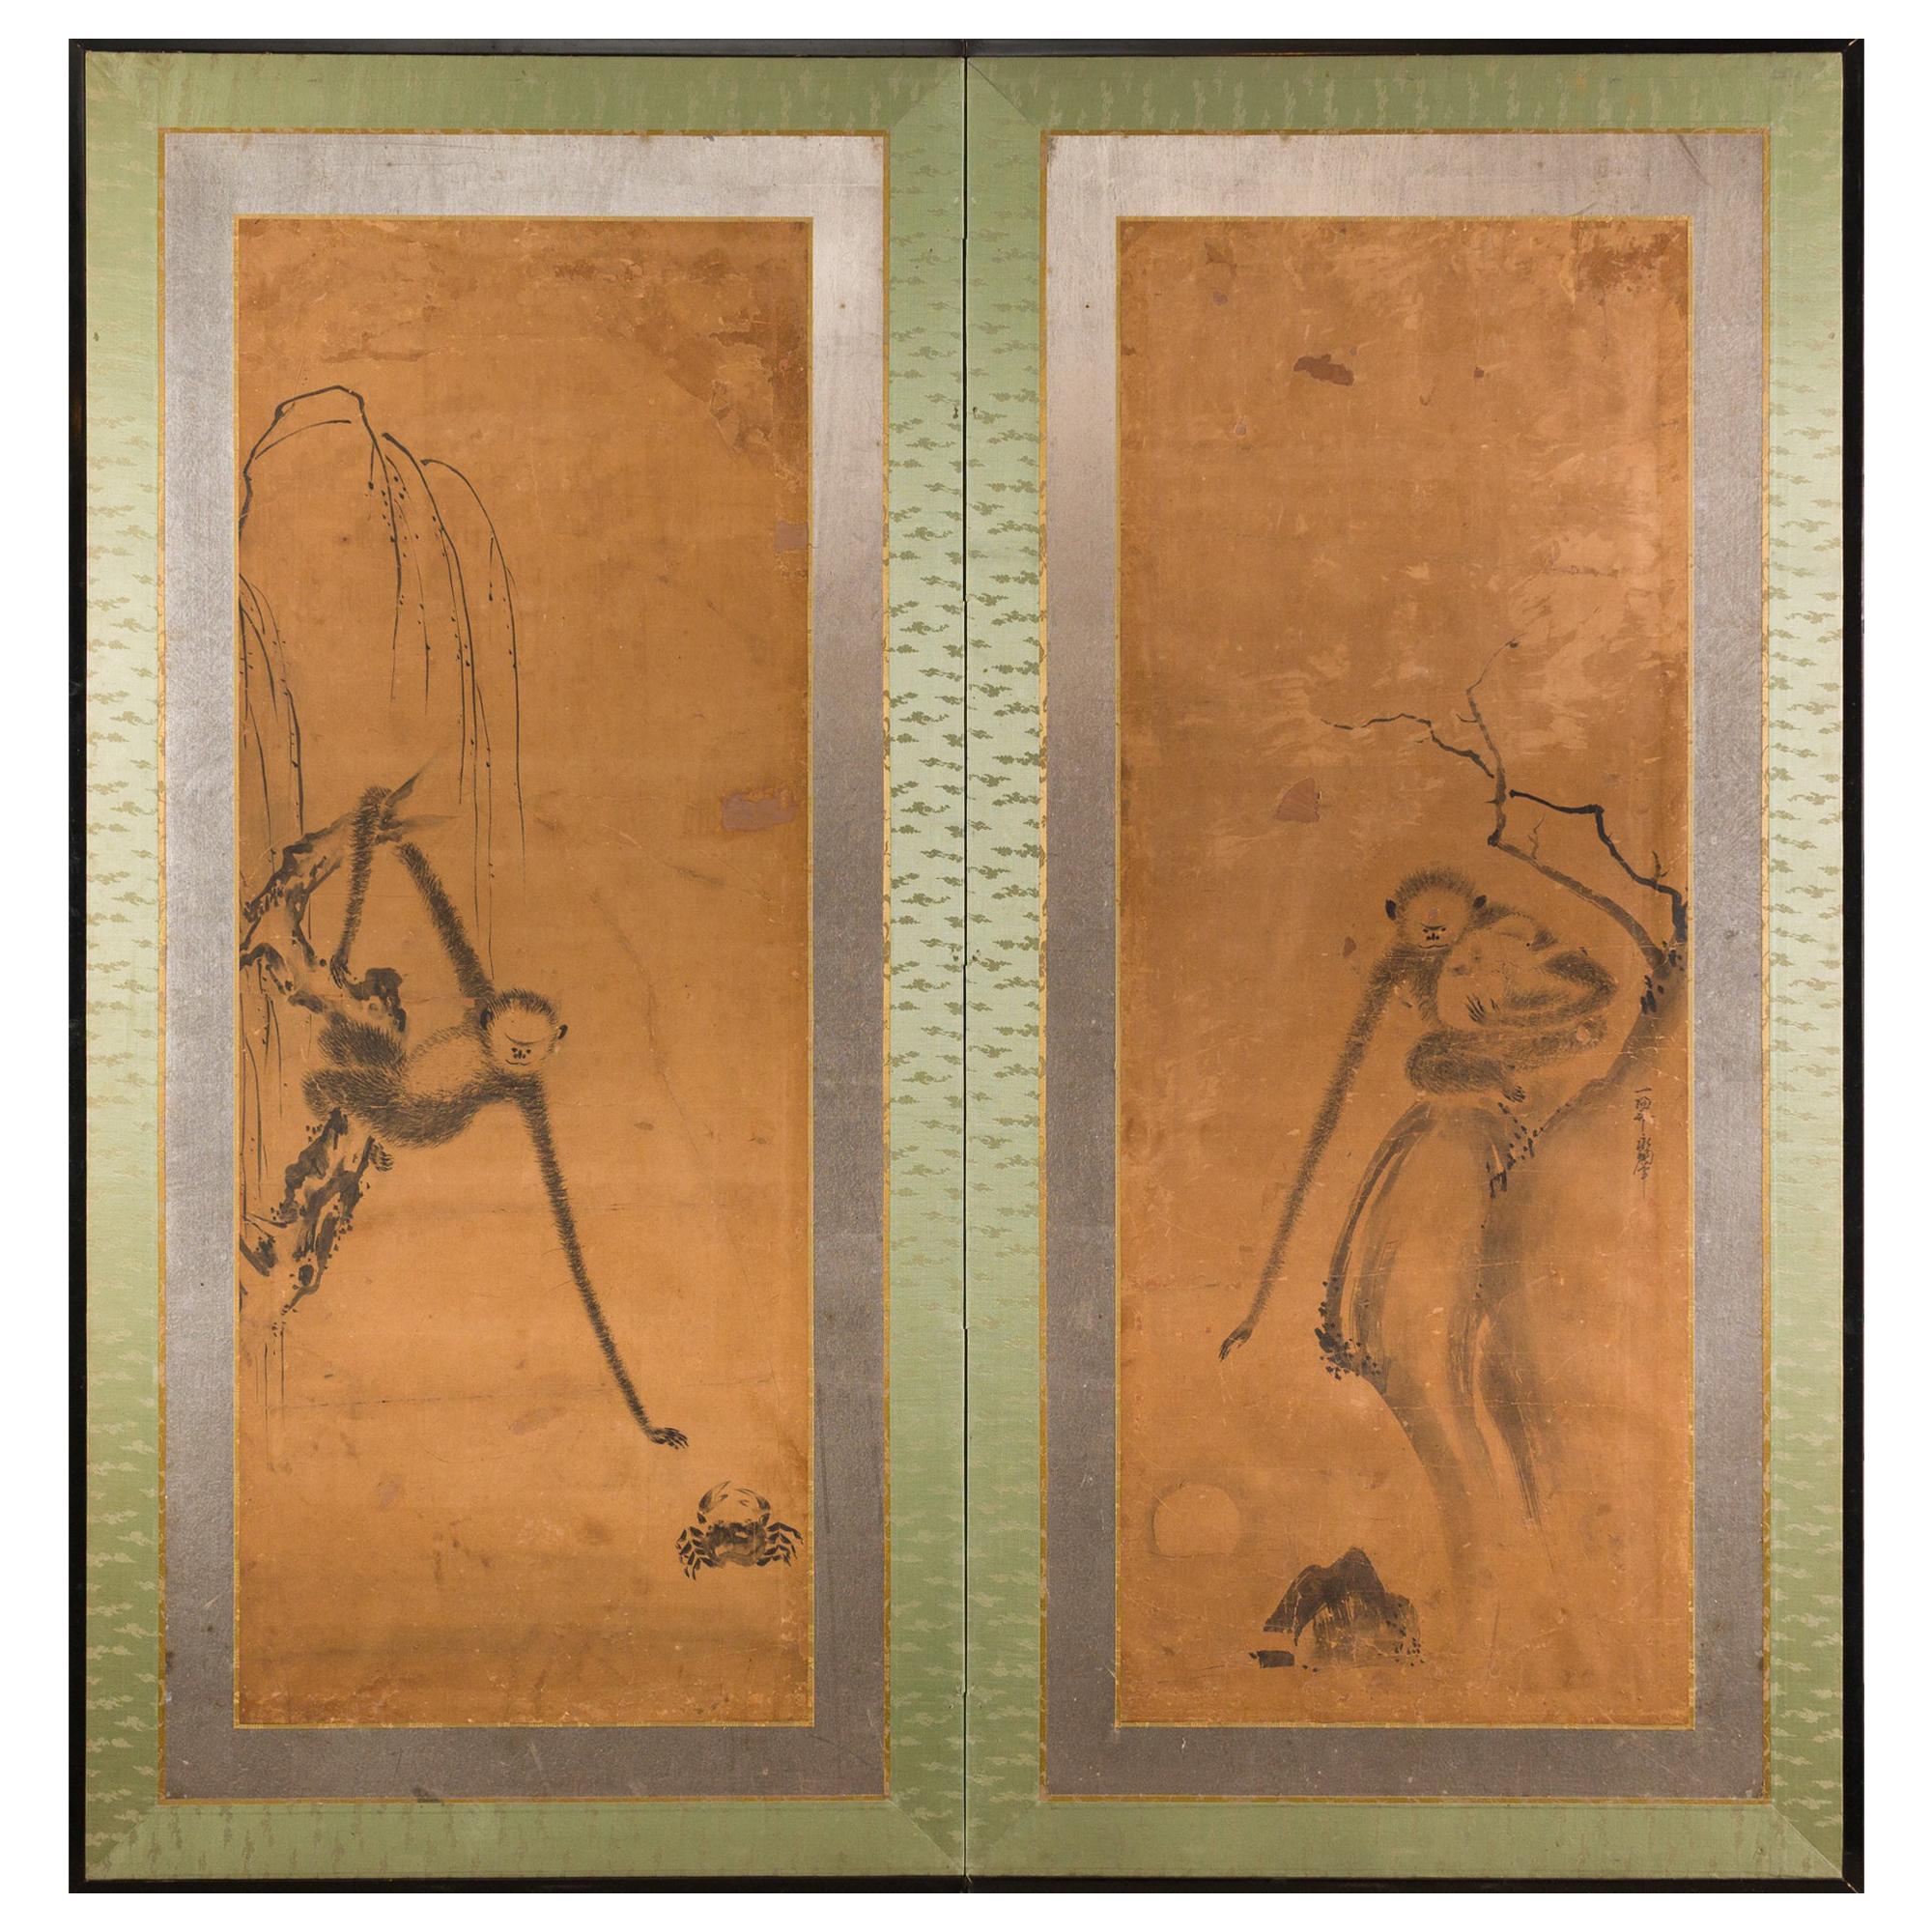 17th Century Japanese Two-Panel Screen, Gibbons of Folklore